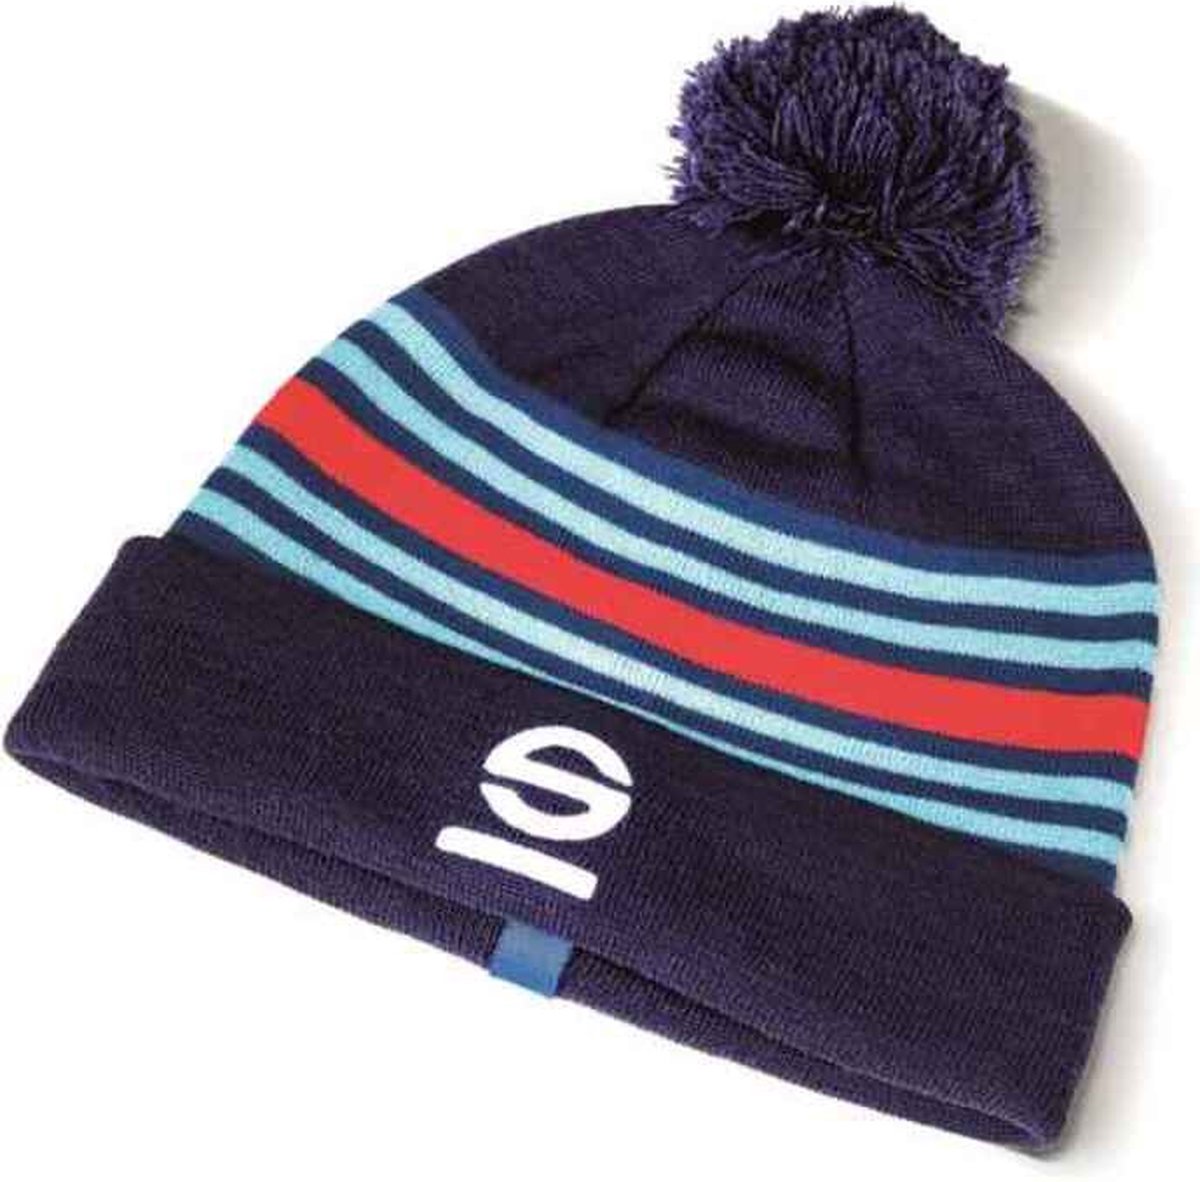 Hat Sparco Martini Racing Red Blue